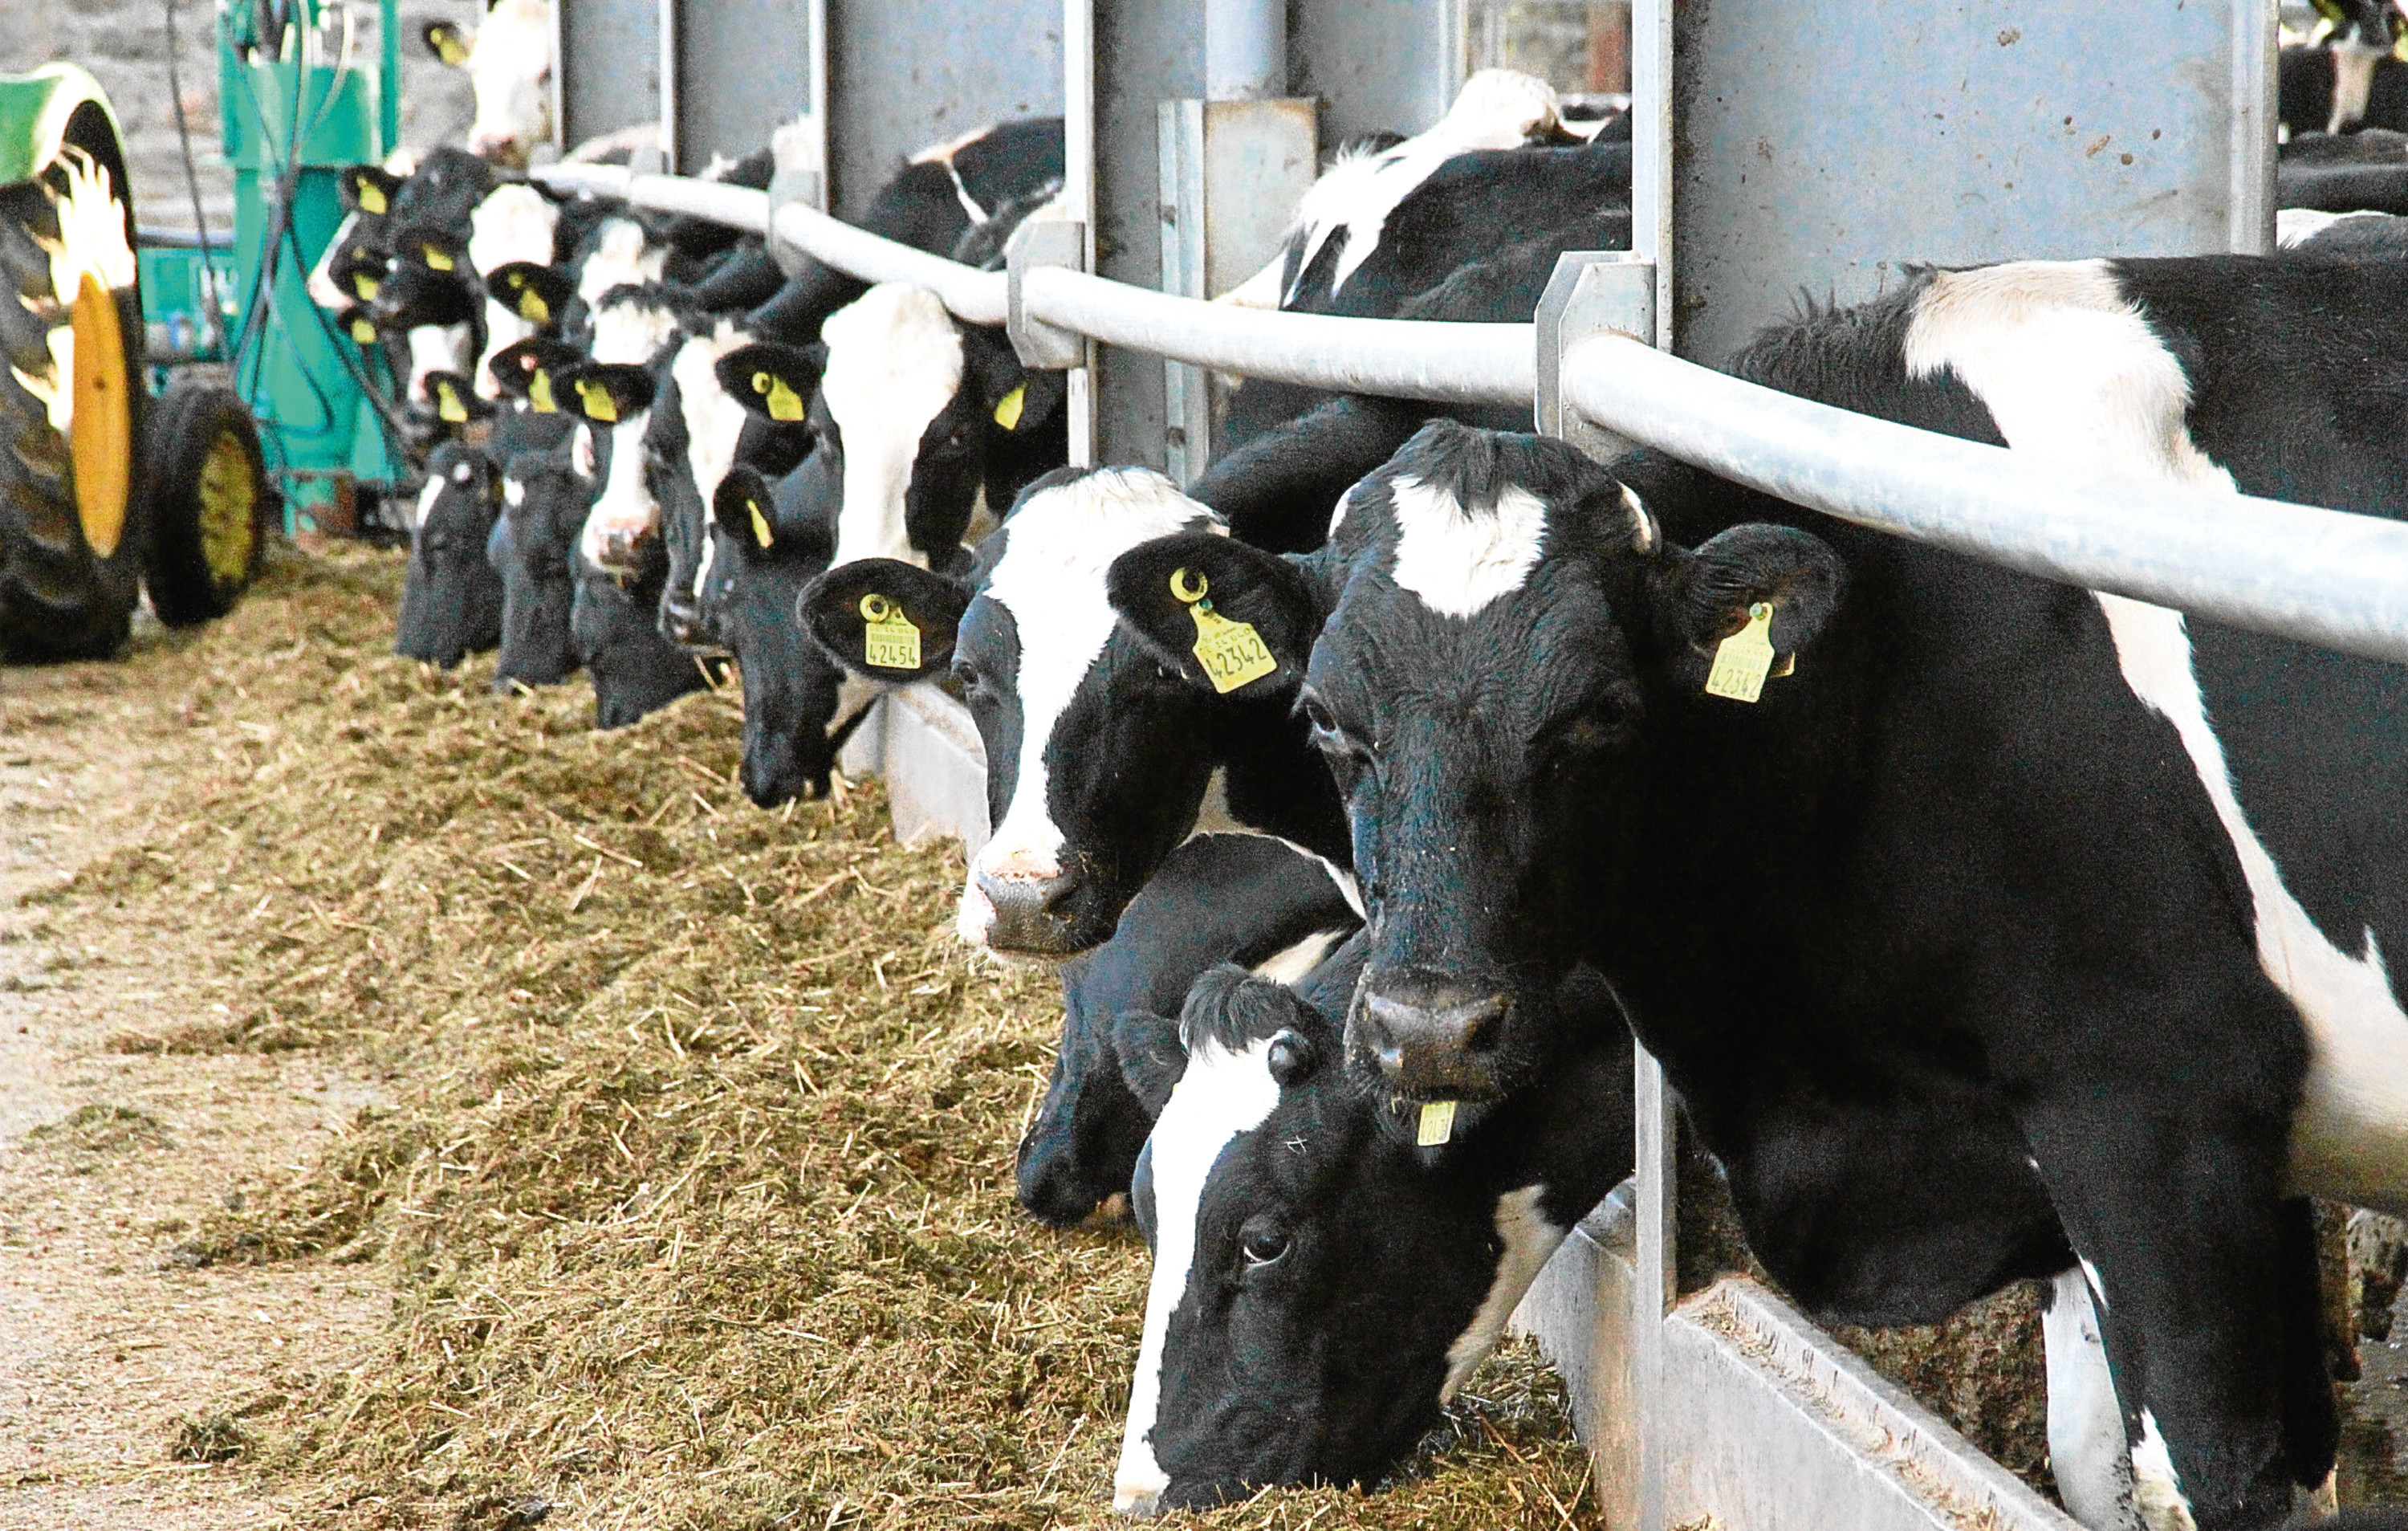 Increased milk prices helped contribute to the rise in fortunes.